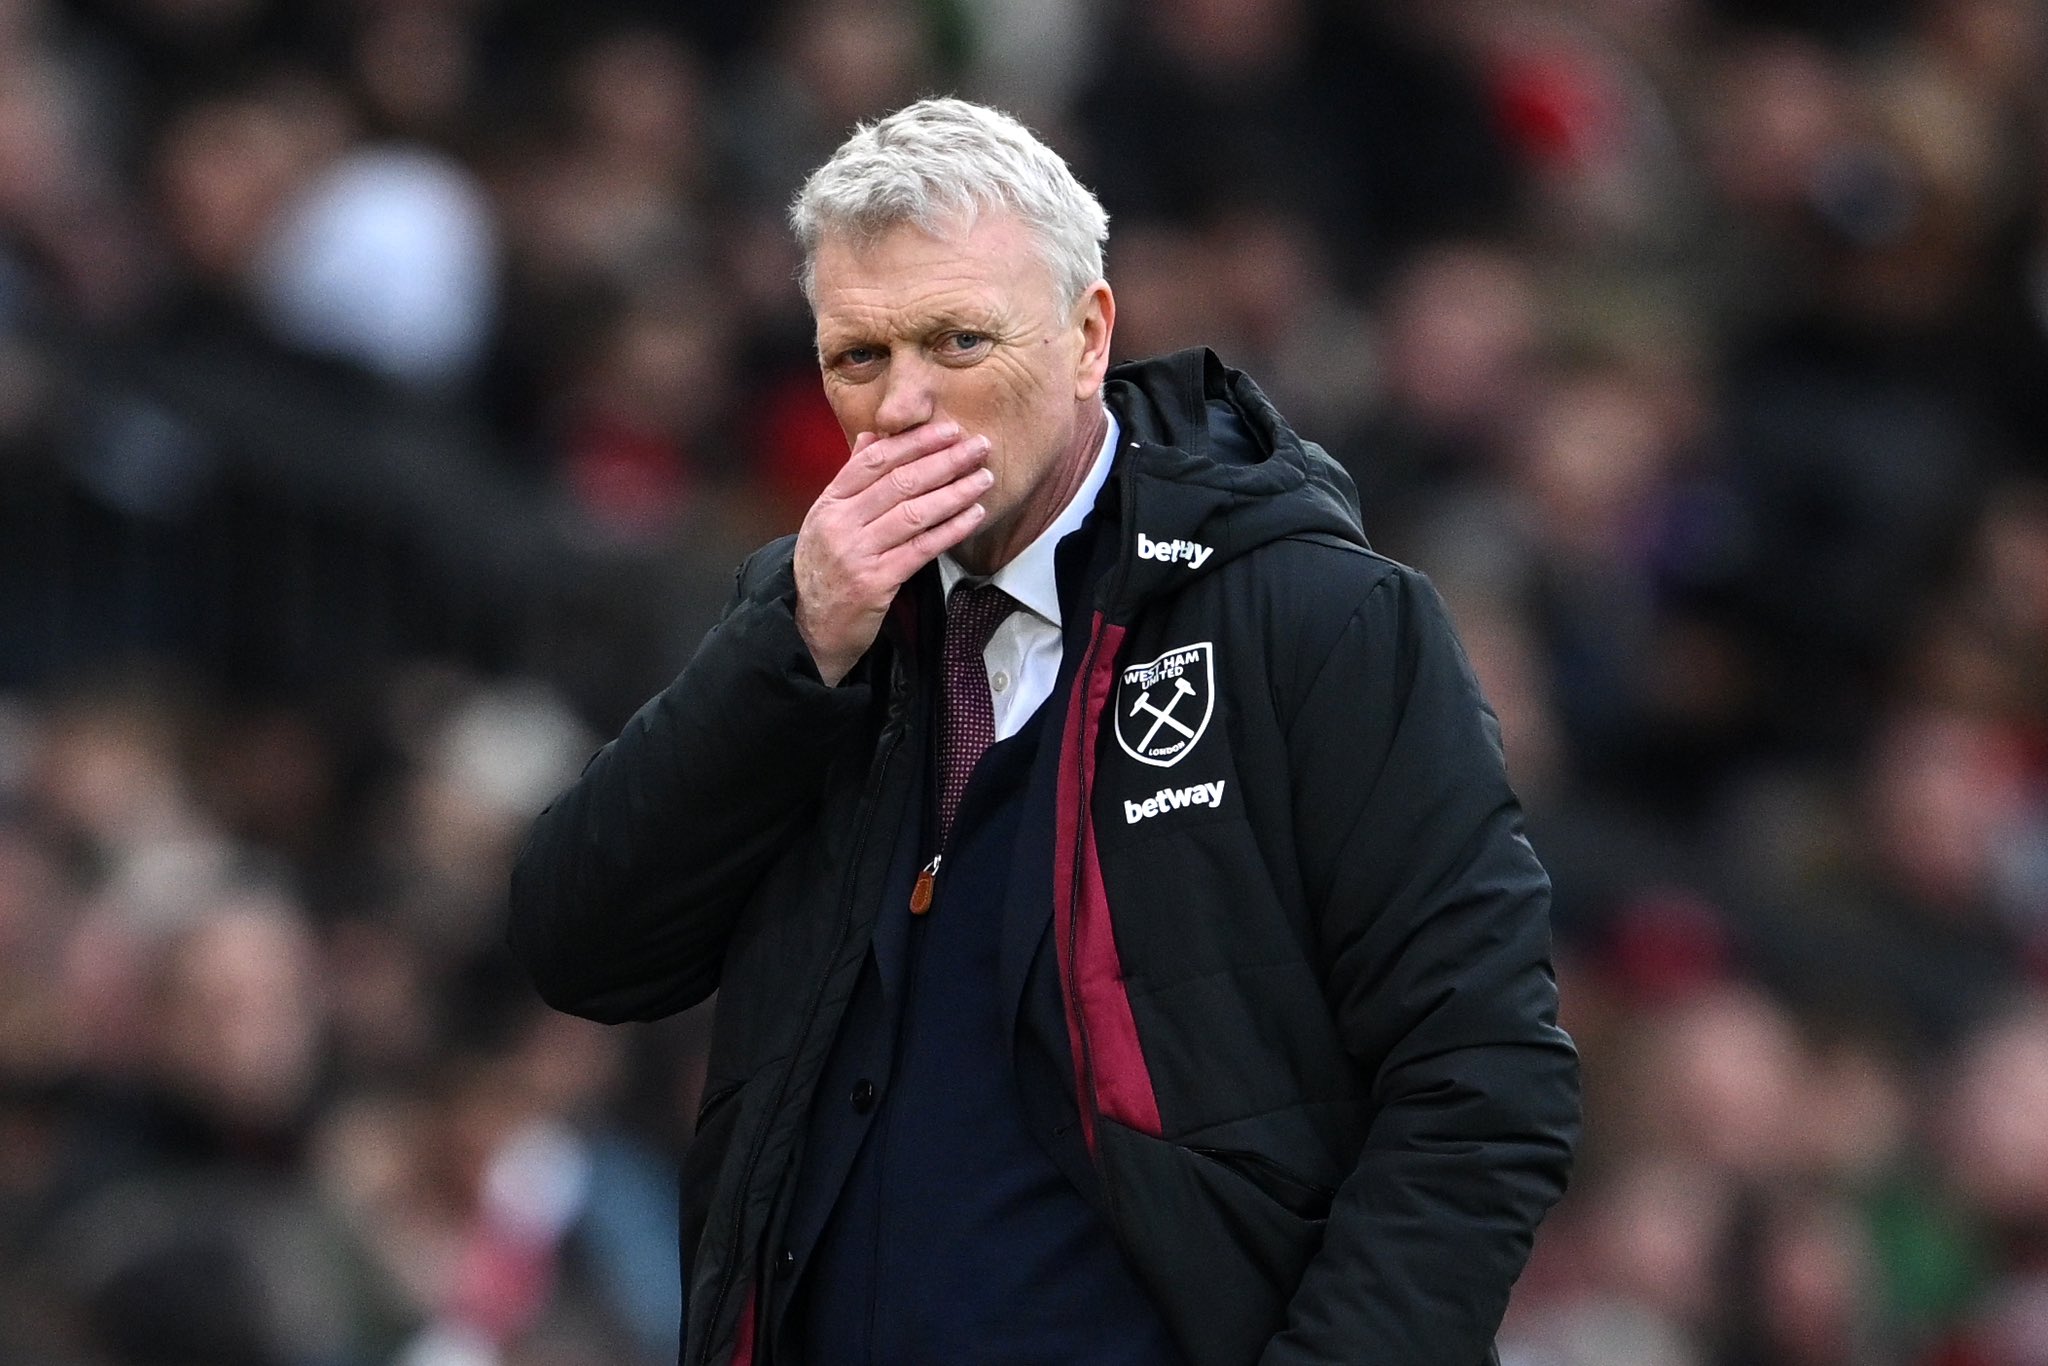 West Ham's manager replacements as David Moyes dubiousness continues.